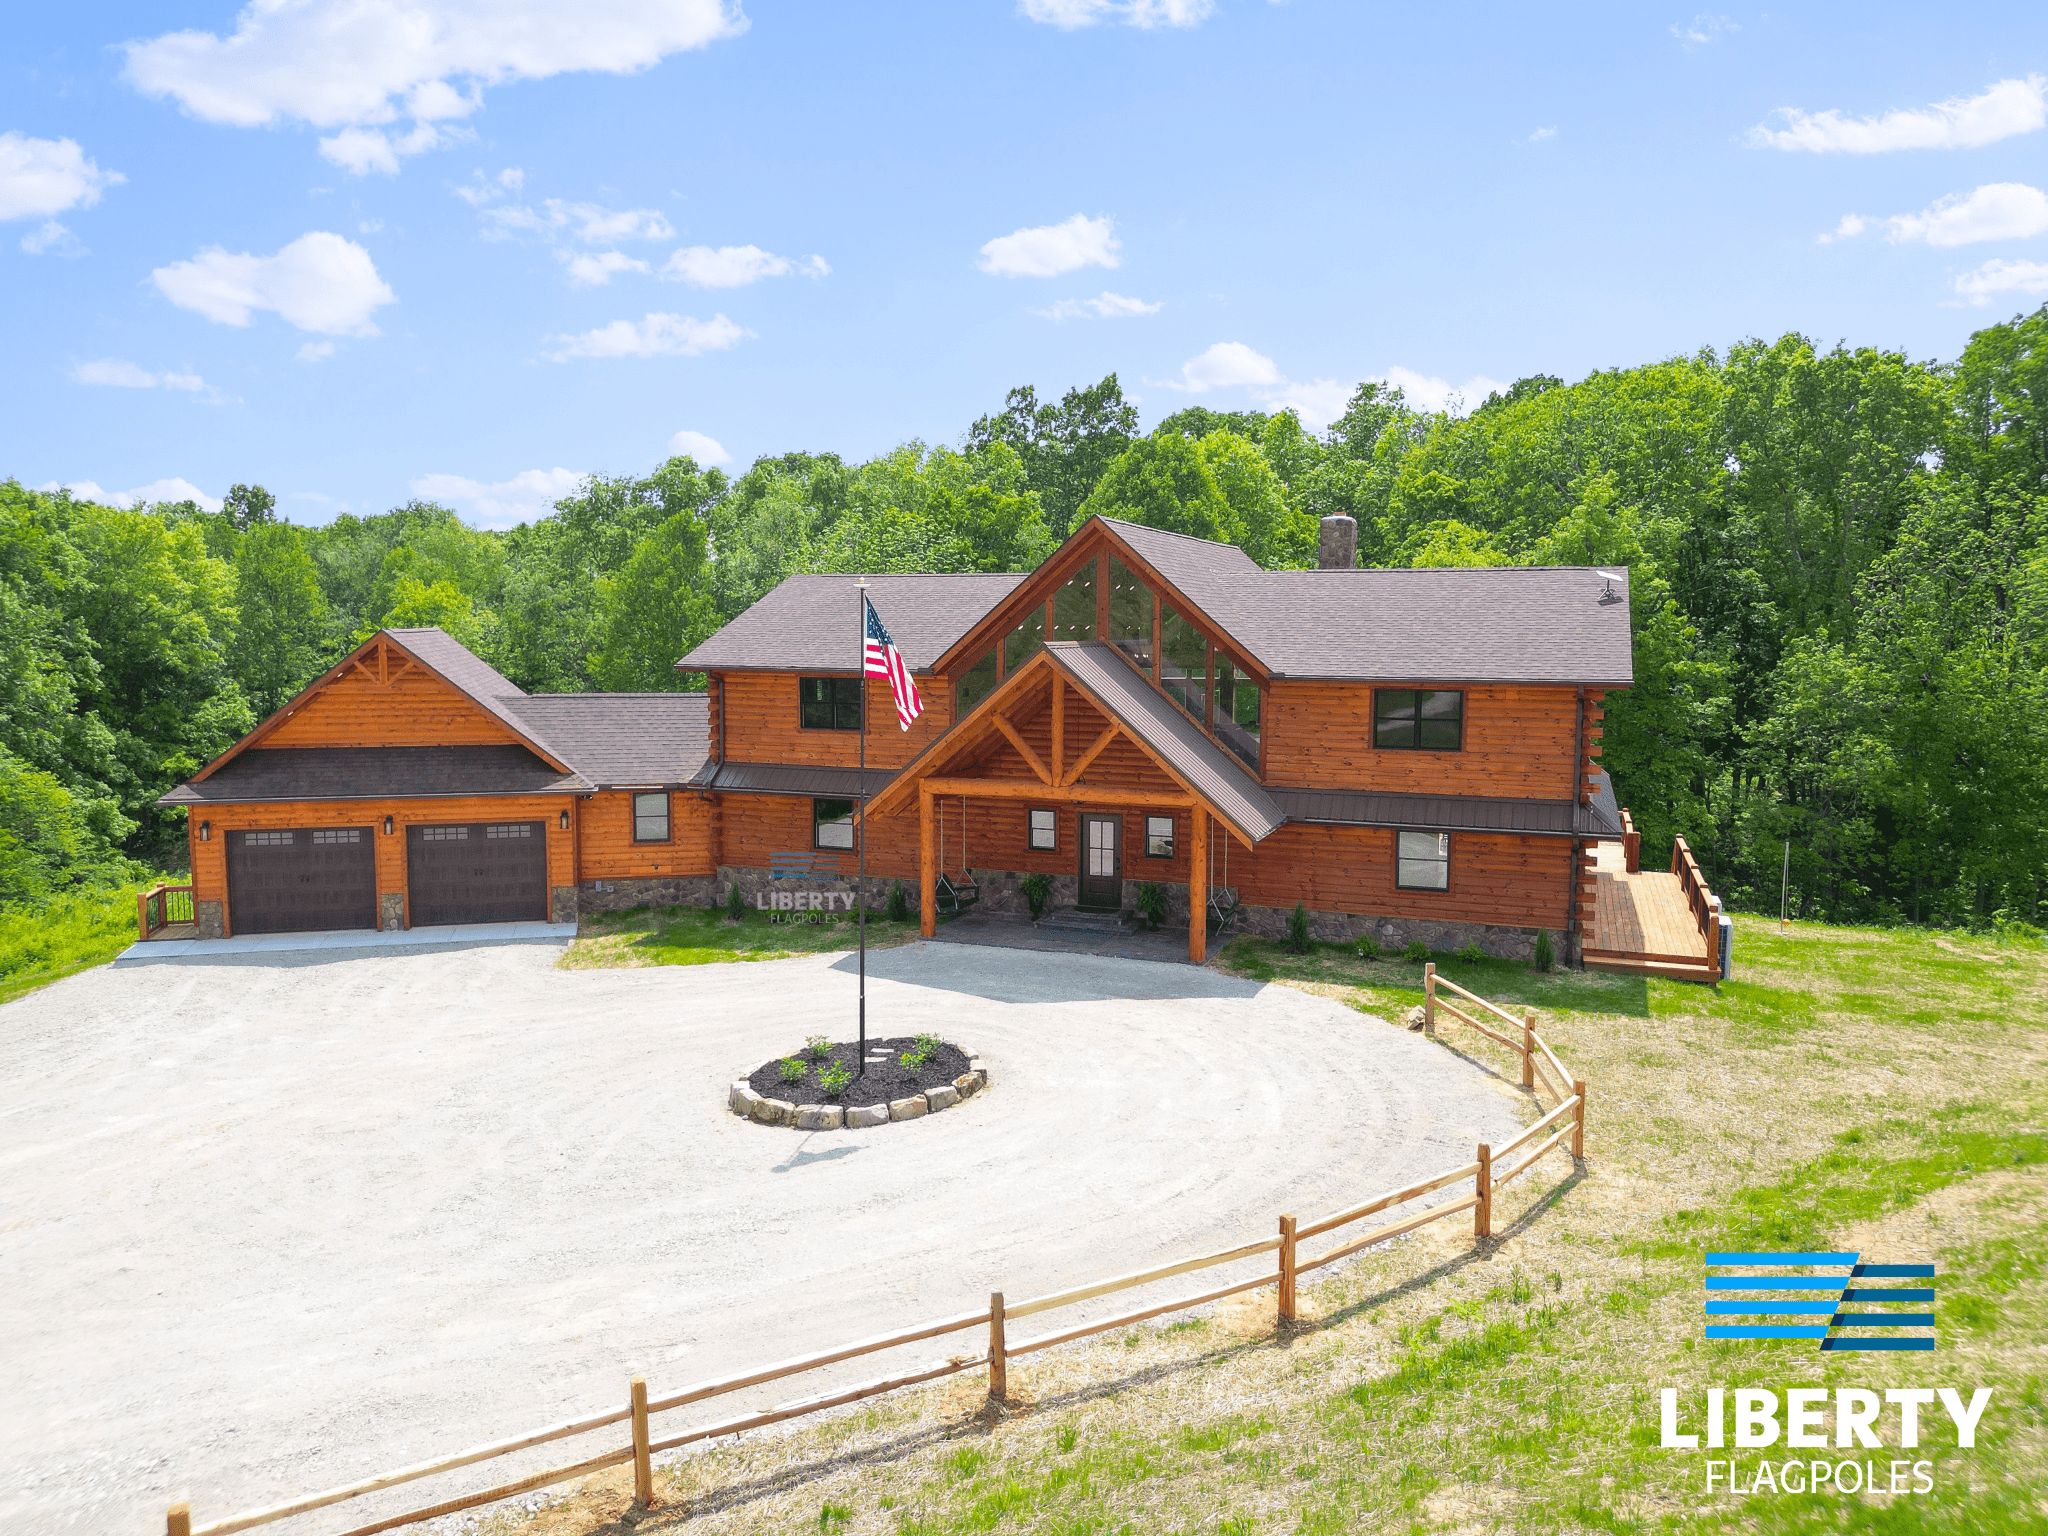 Beautiful log cabin showcasing Liberty Flagpoles american standard heavy duty telescoping flagpole in the circle driveway with landscape center